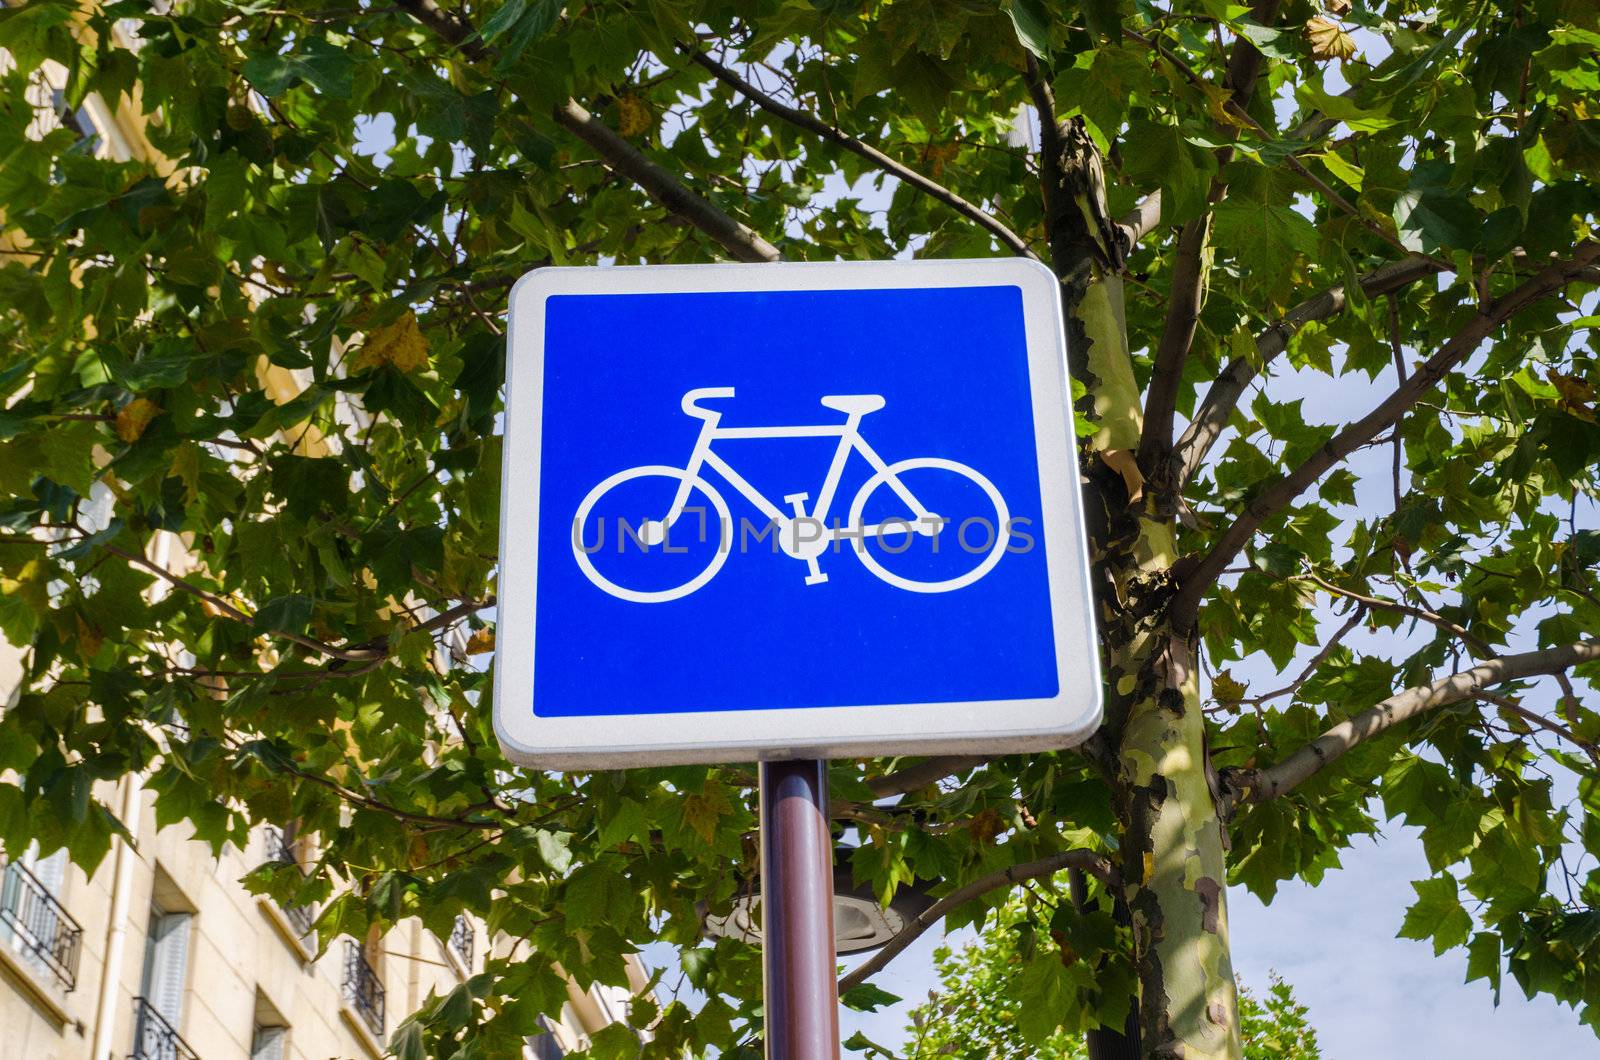 Bicycle sign on blue background